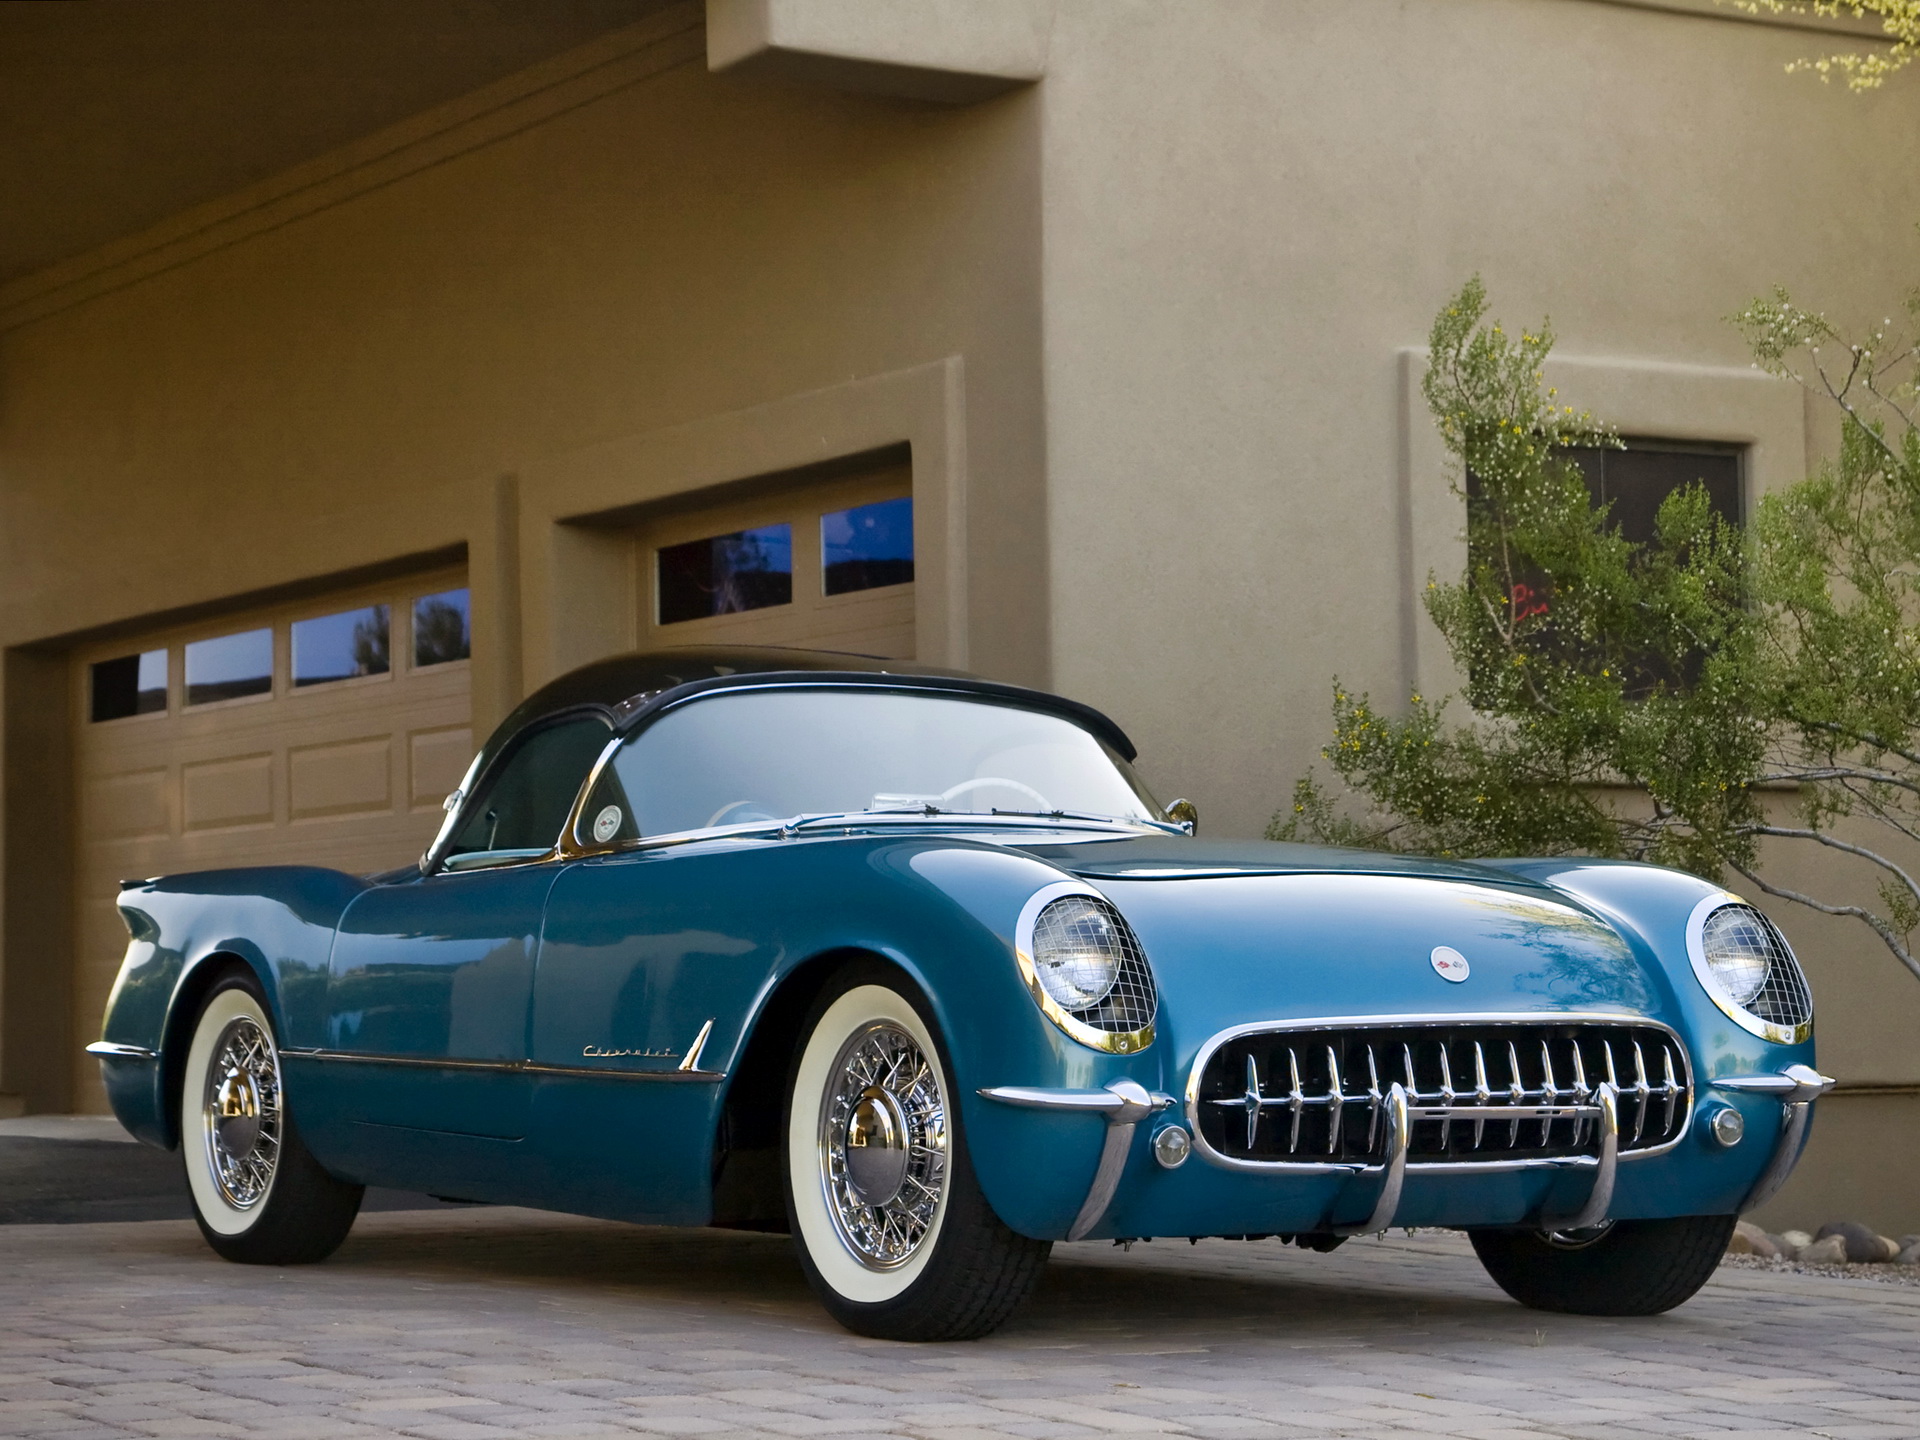 1954, Chevrolet, Corvette, Vehicles, Cars, Chevy, Retro, Old, Classic, Wheels, Blue, Grill, Chrome, Muscle Wallpaper